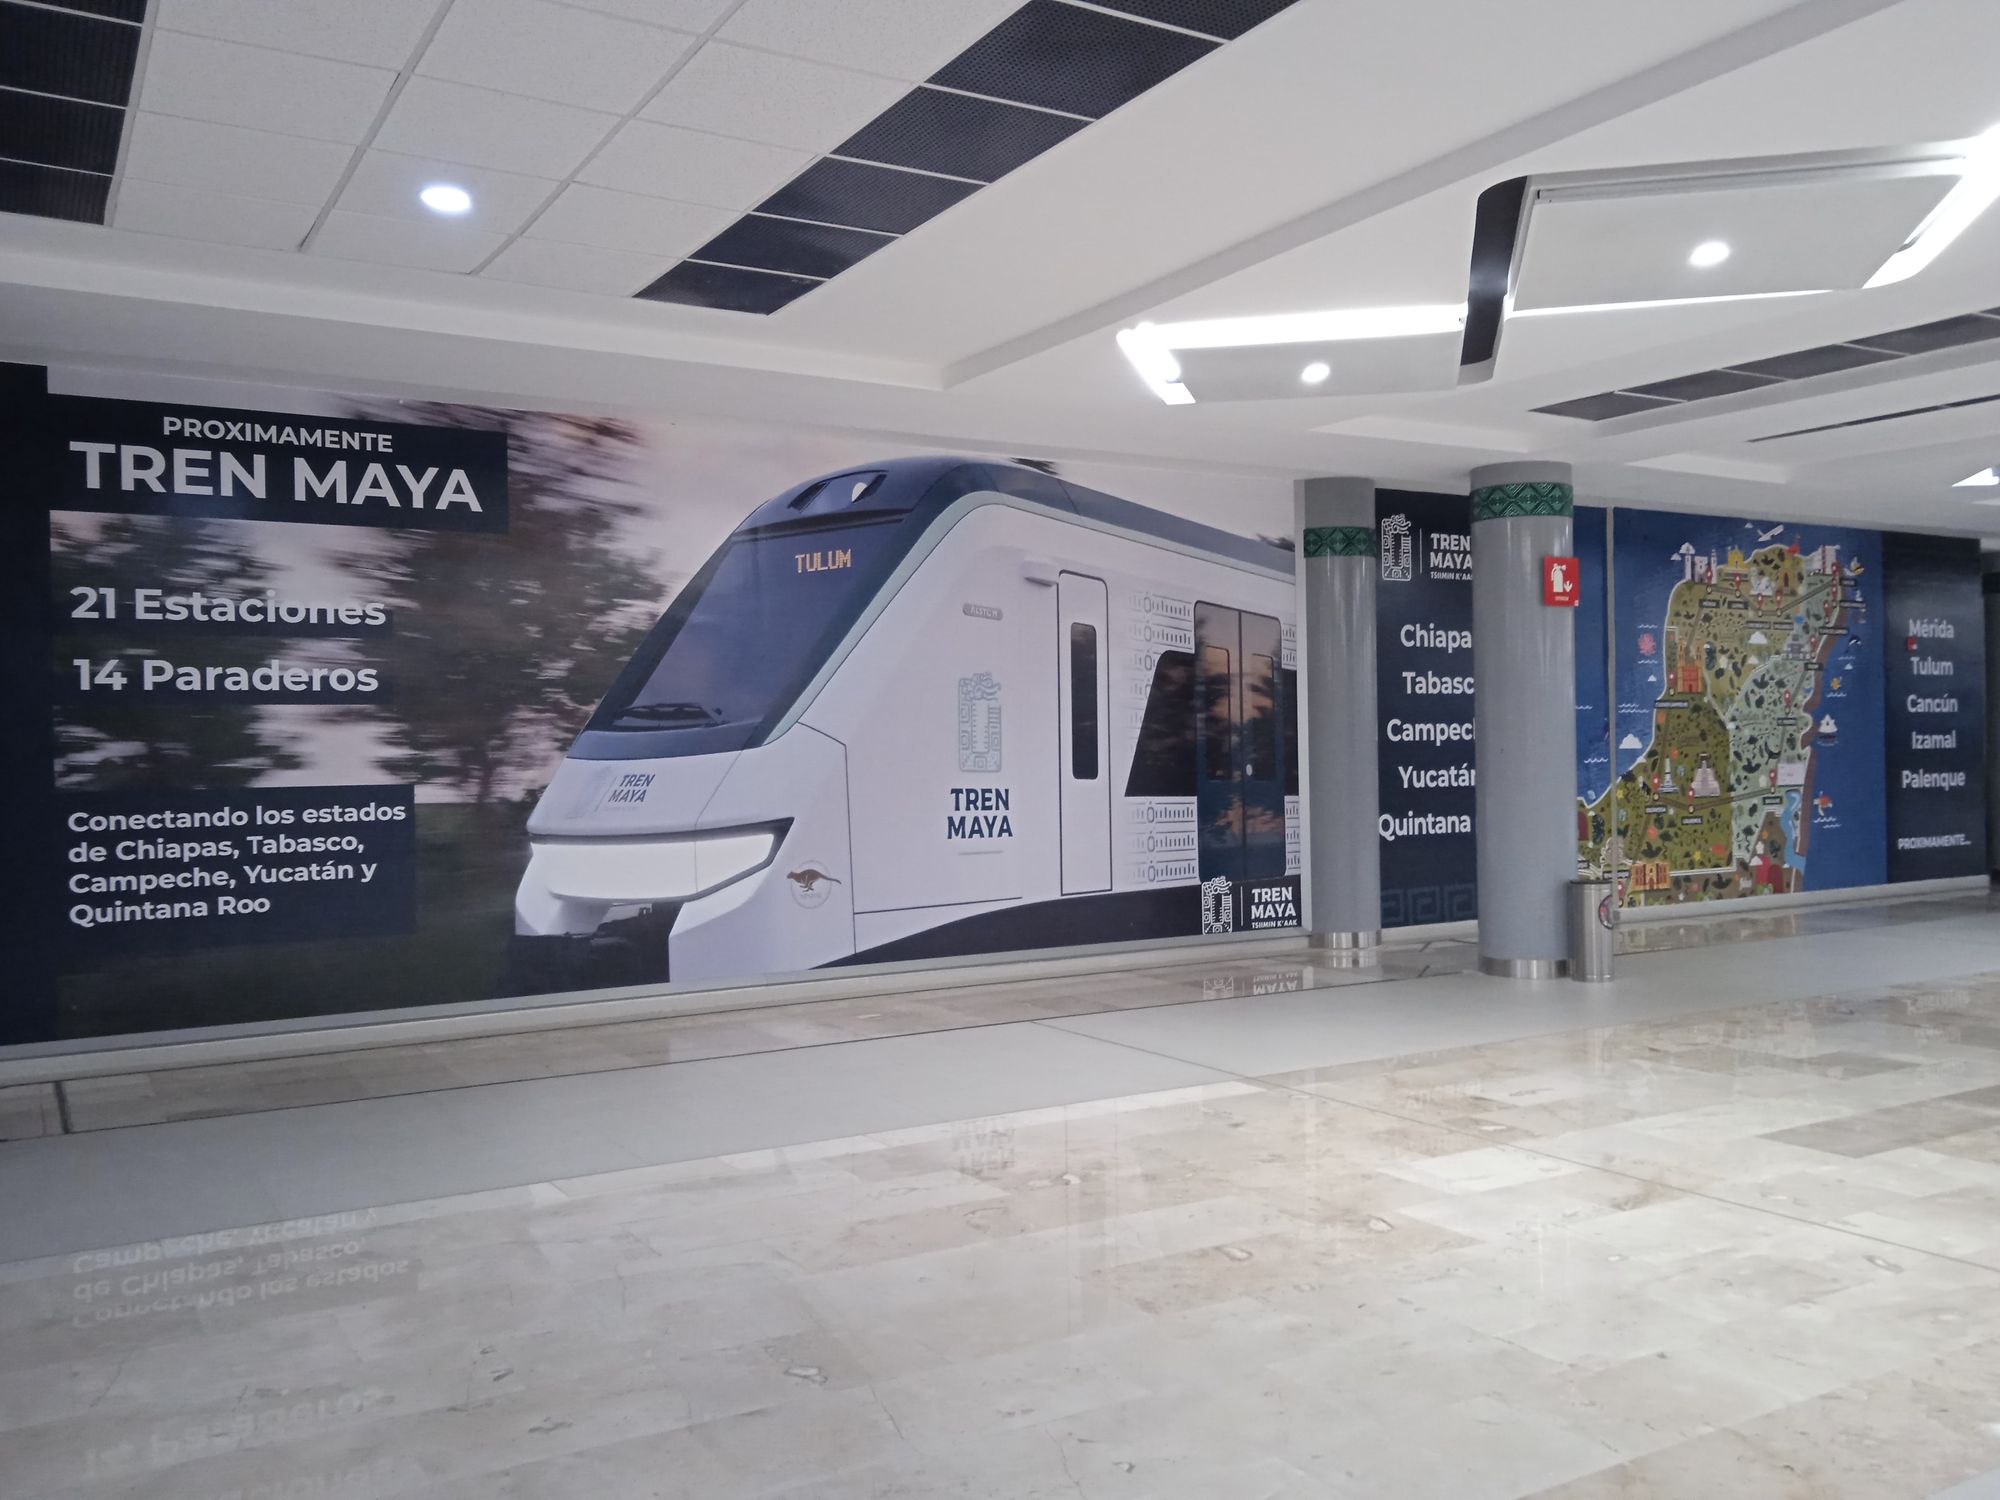 Baggage collection hall at Felipe Ángeles international airport, Estado de México. Pale beige flooring meets a wall covered in an advertisement for the Tren Maya. The ad shows a picture ofo an electric train - a blue and white front carriage with the destination 'TULUM' on the front up the top in digital letters. On the left, large white lettering says: Proximamente Tren Maya (Maya Tren Coming Soon), 21 Estaciones 14 Paraderos (21 stations 14 stops), Conectando los estados de Chiapas, Tabasco, Campeche, Yucatán y Quintana Roo (Connecting the states of Chiapas, Tabasco, Campeche, Yucatán, Quintana Roo). On the right the viewer can glimpse a map of the train's route in a series of green, blue and yellow tones. Photo: Ann Deslandes, August 2023